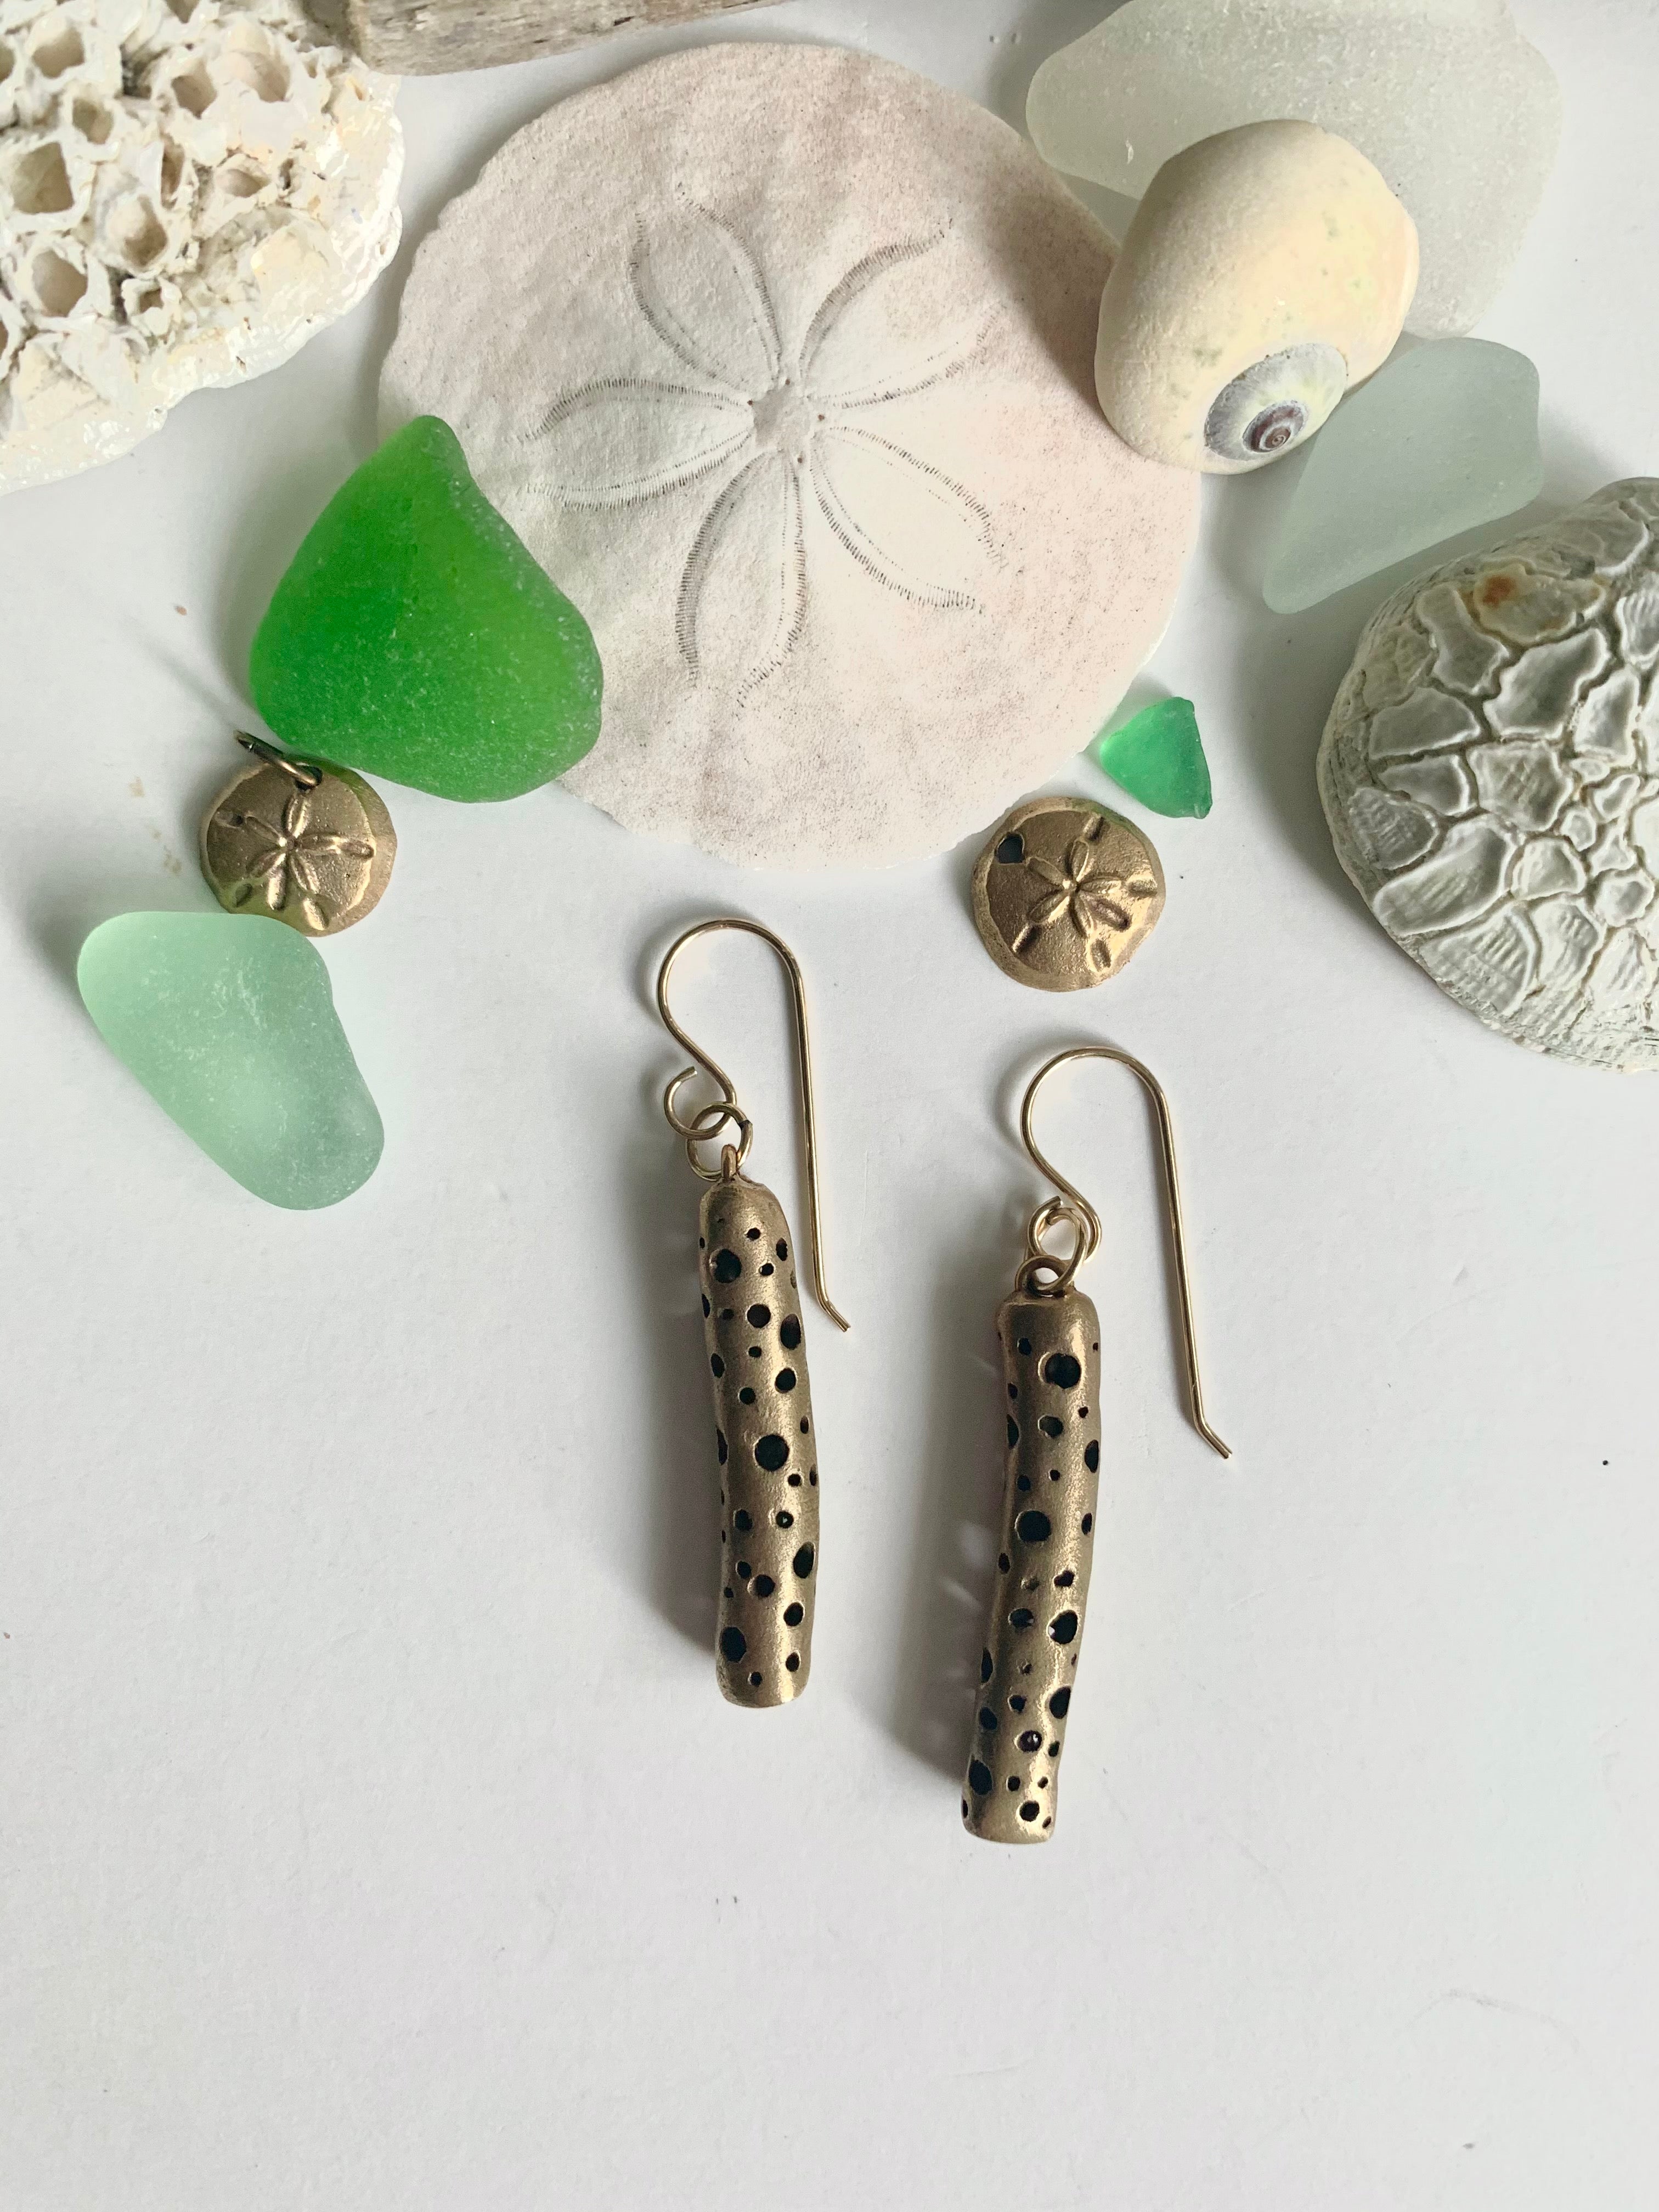 Favourite everyday bronze earrings shells and green sea glass